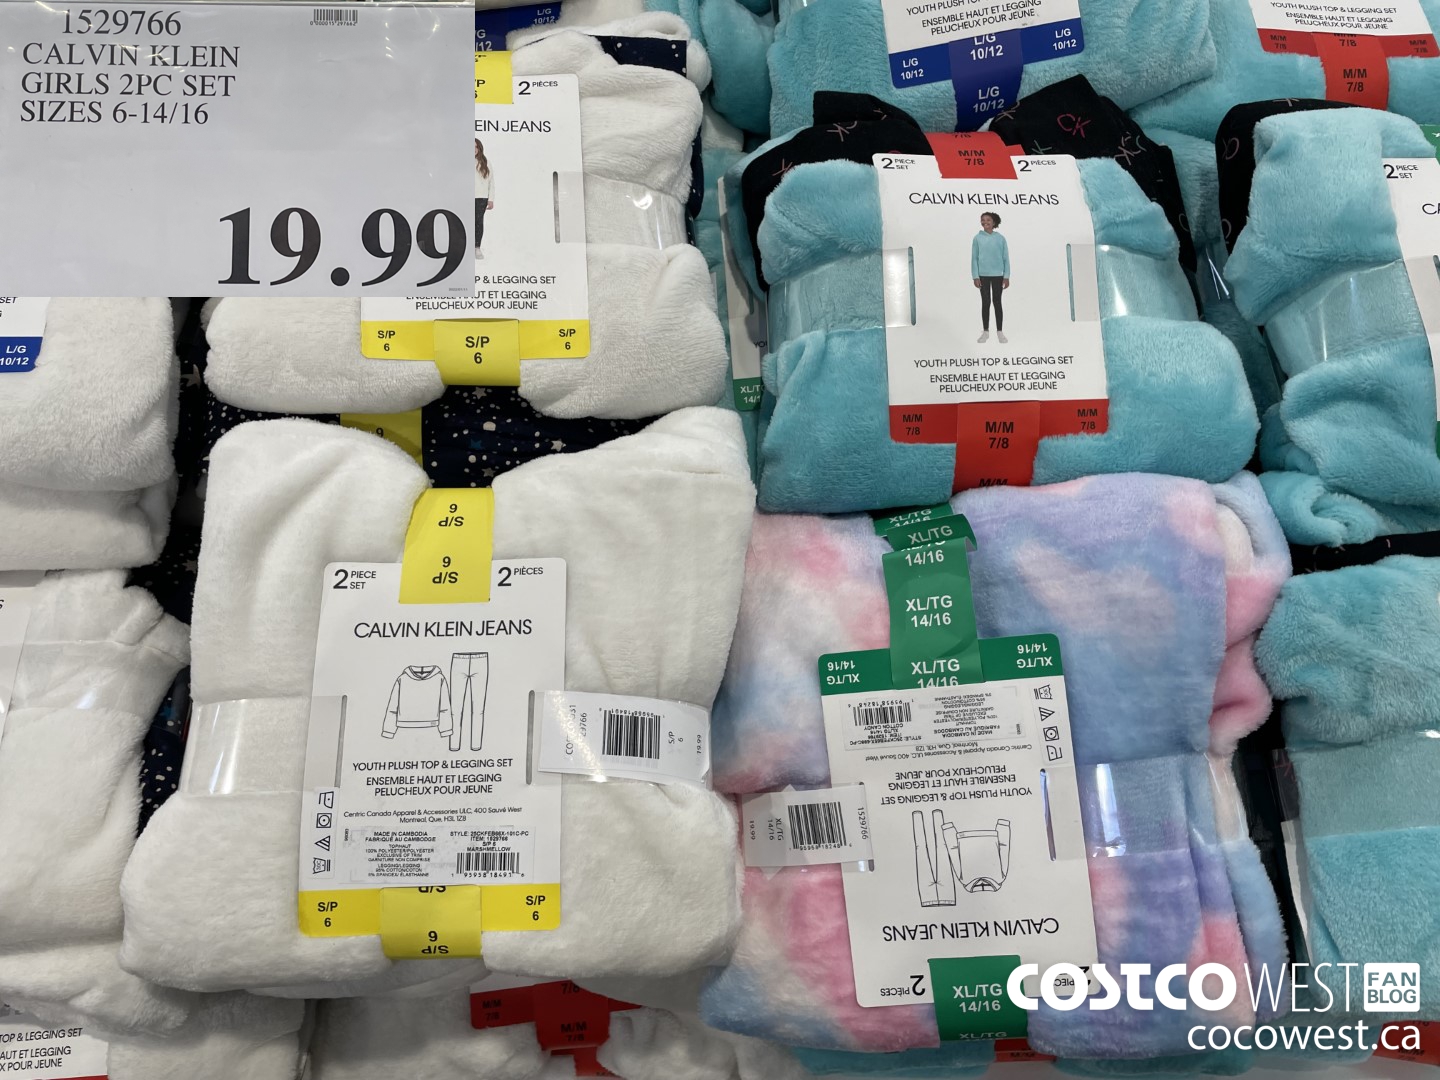 2-piece Calvin Klein lounge sets are at Costco for only $19.99! So